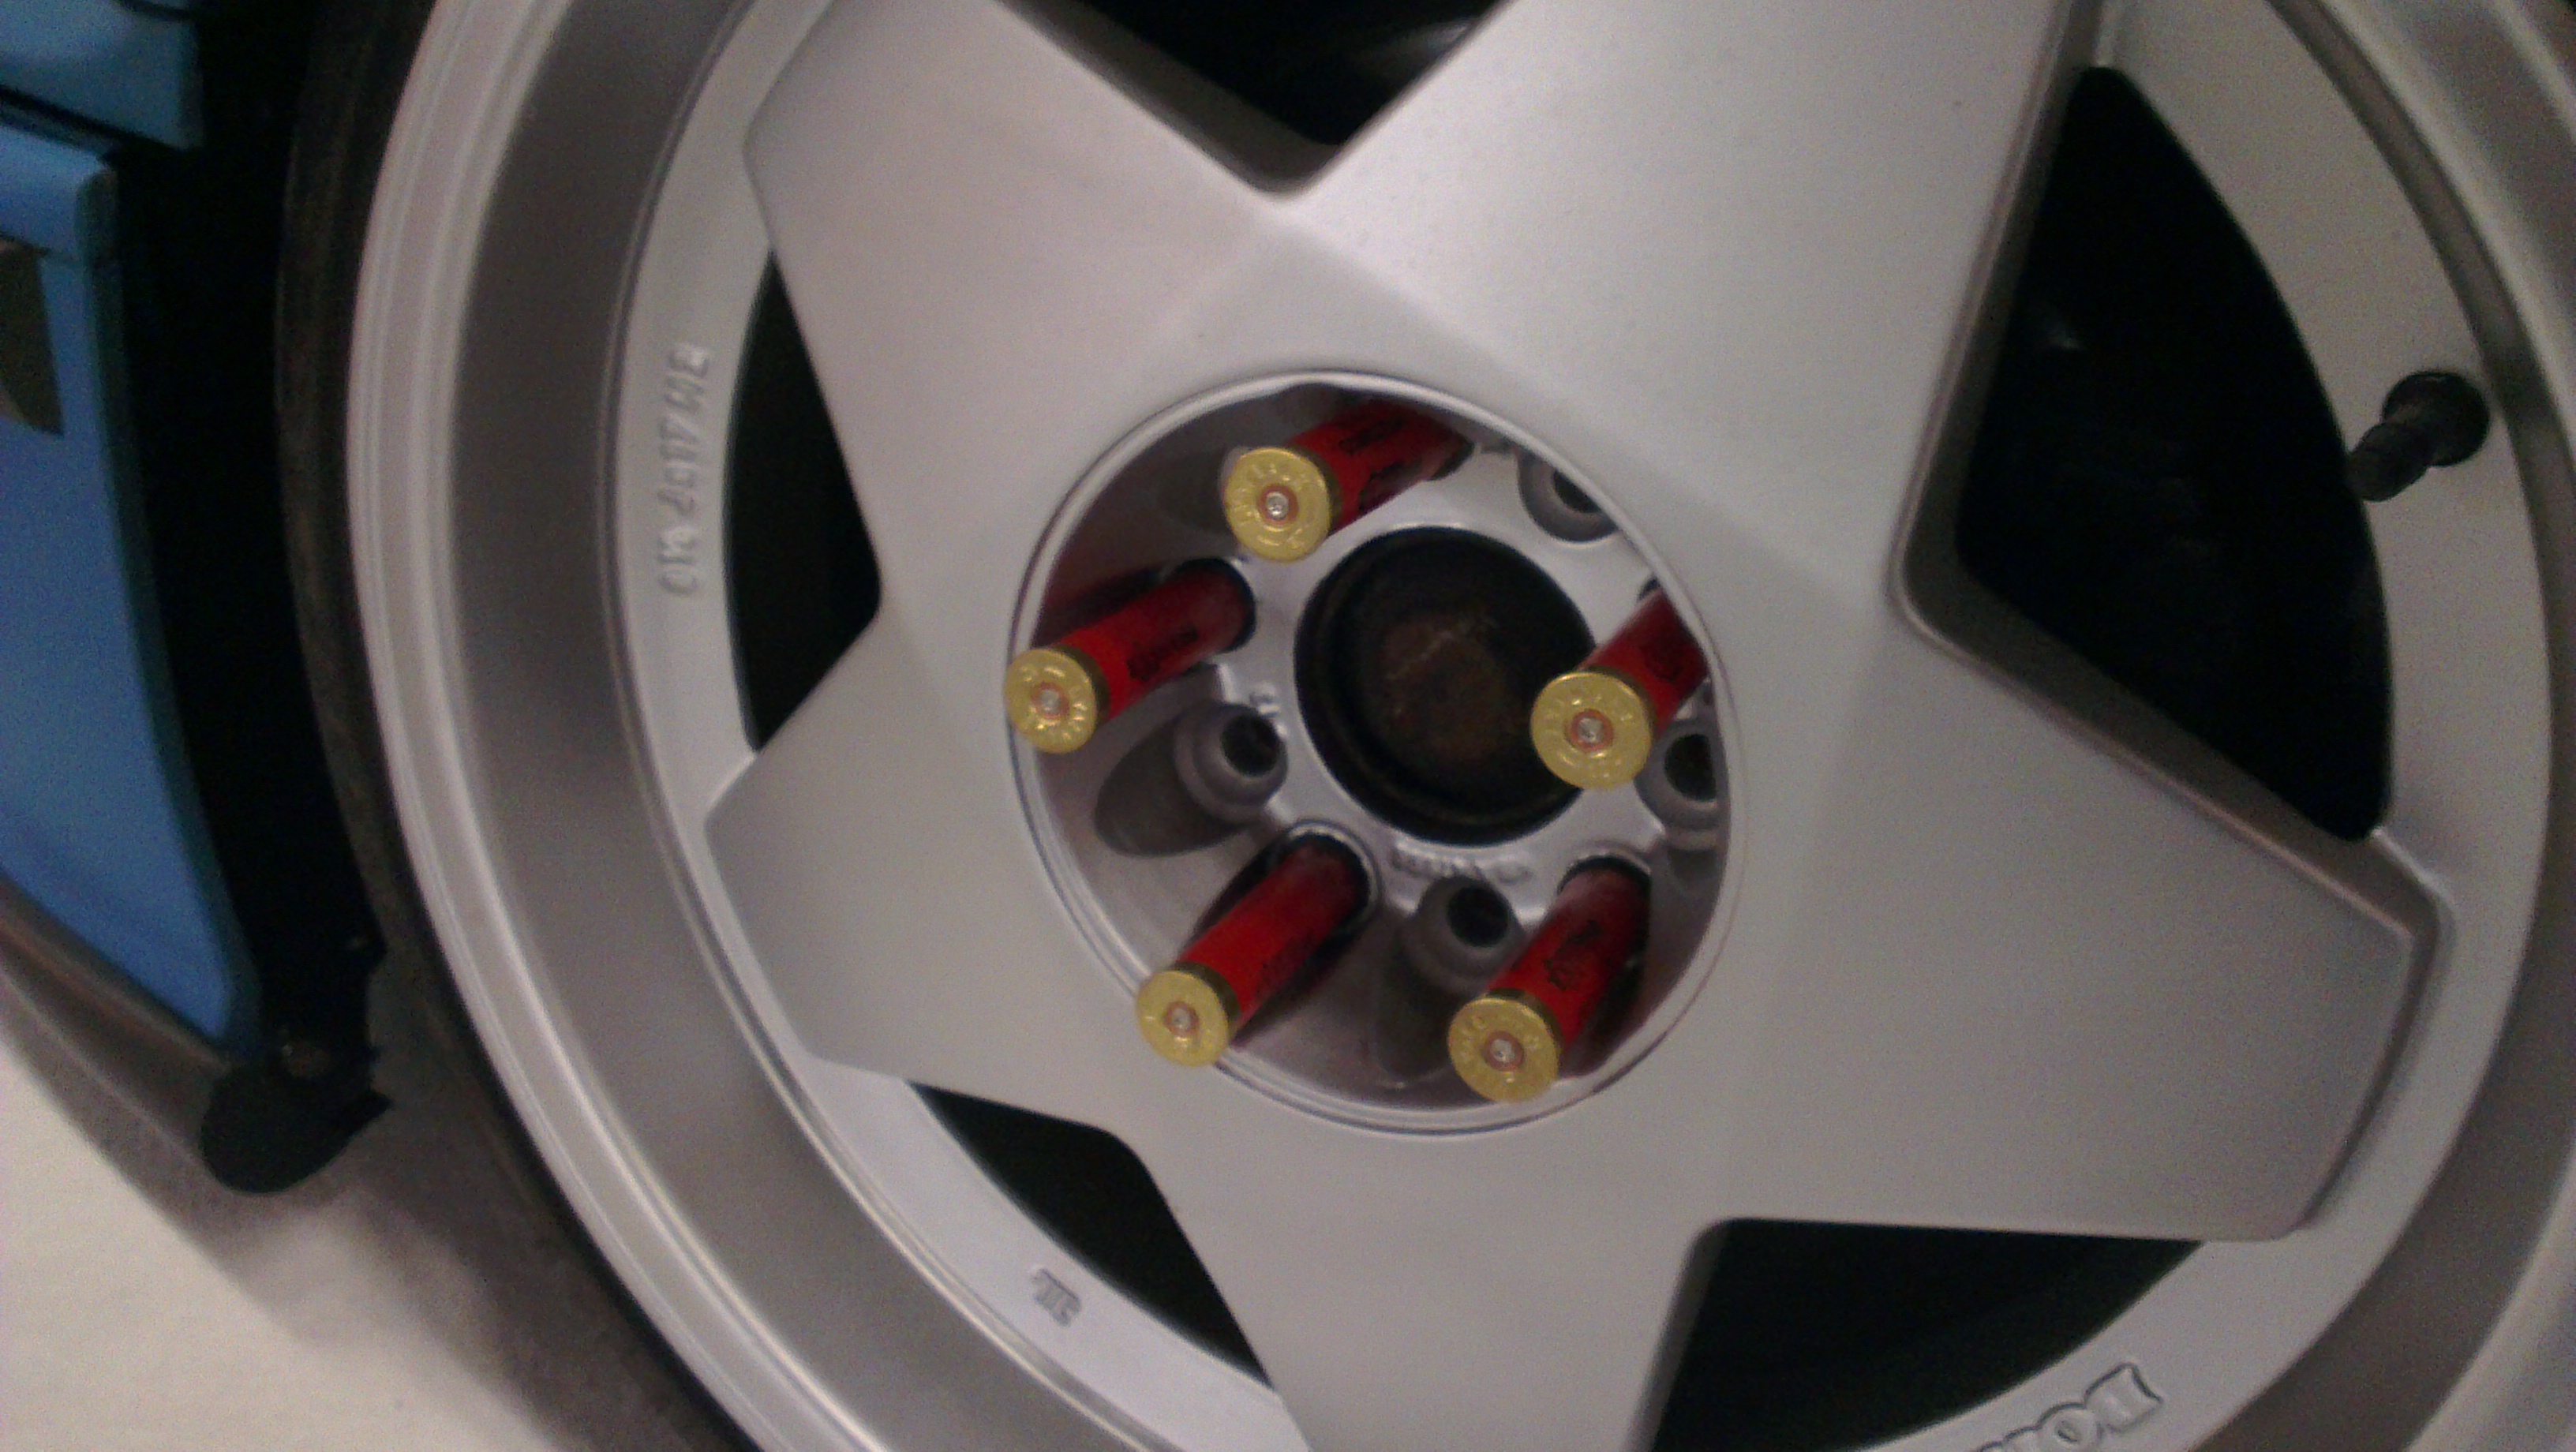 Shotgun shells for wheel bolts. Because why not.